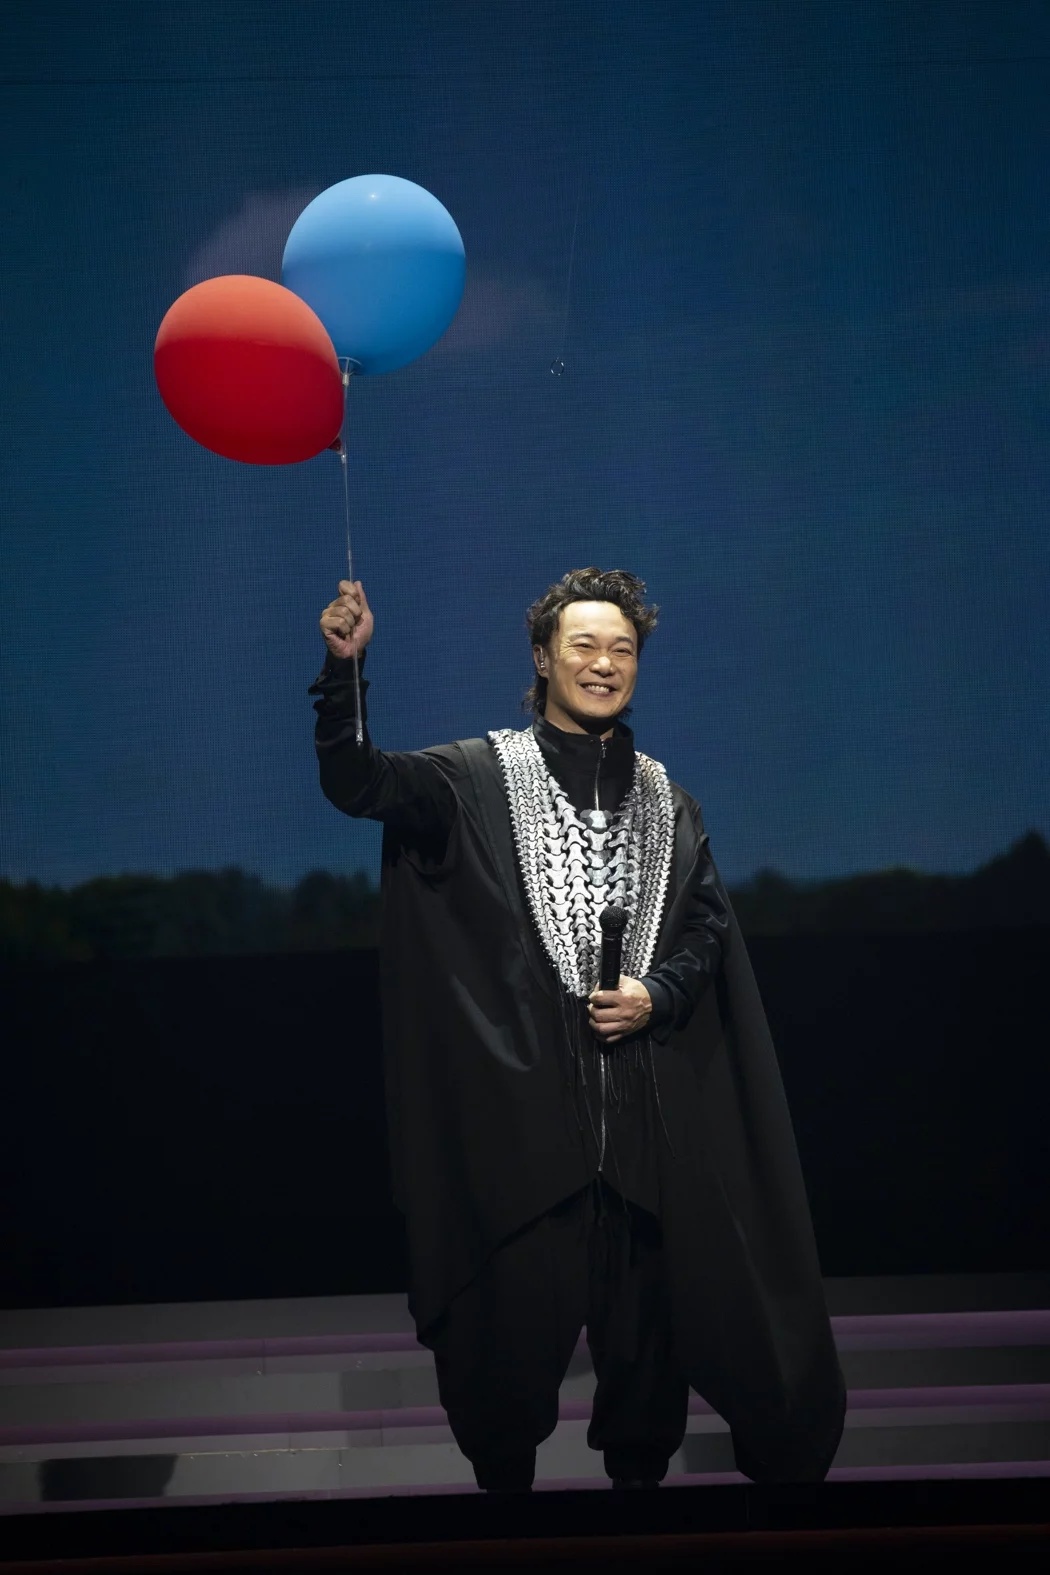 Eason Chan added 2 games to add meaning to epidemic prevention and send air kisses to his wife and daughter